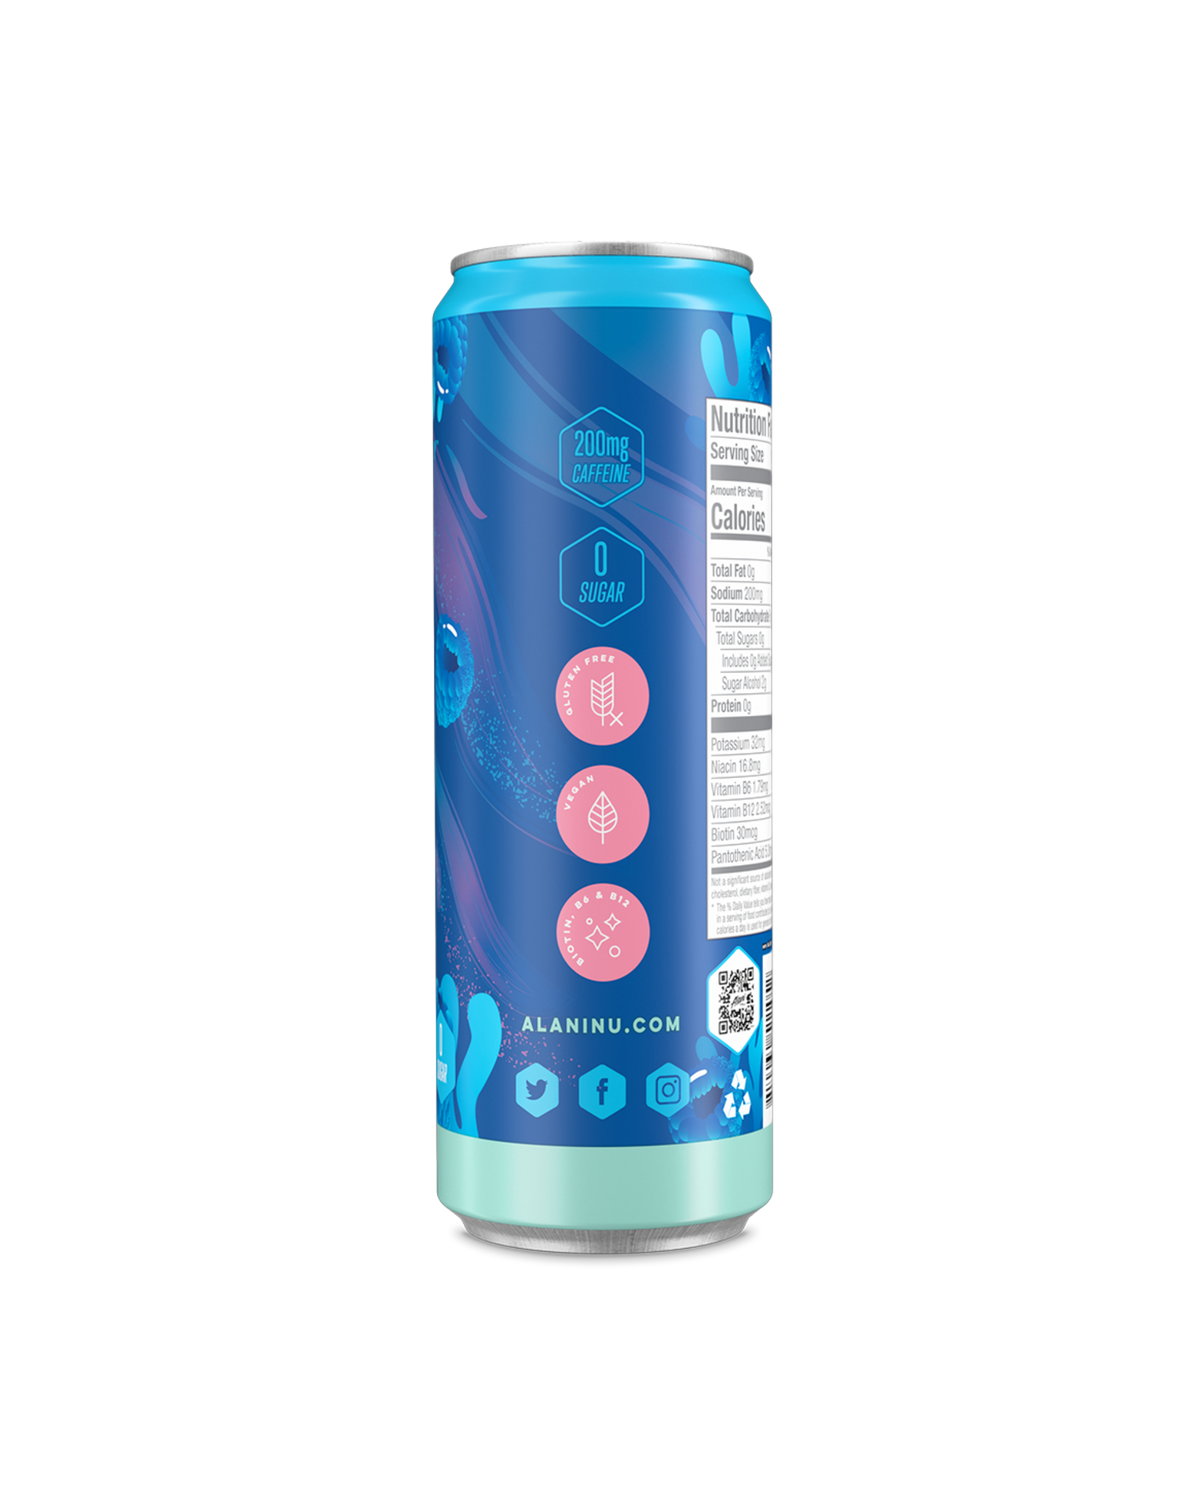 A side view energy drink in Breezeberry flavor showcasing suggested use of product.